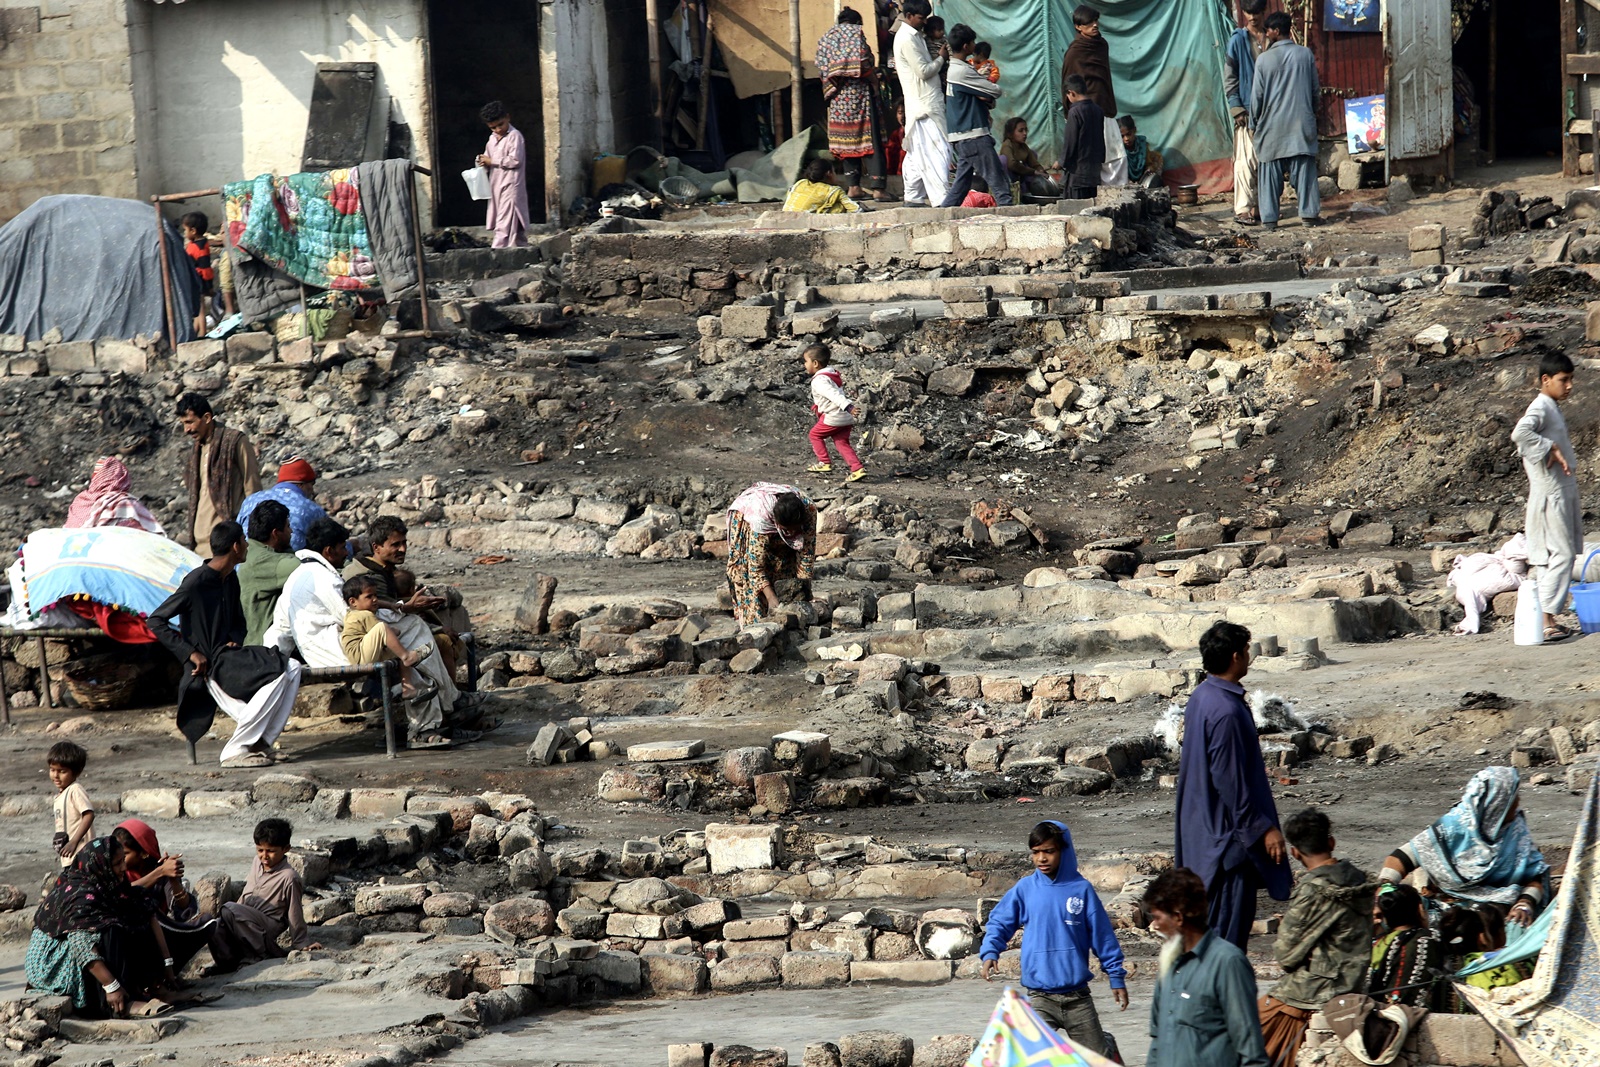 epa11058682 People are seen at a damaged area after a fire broke out in the slums beneath the Teen Hatti Bridge, engulfing more than 15 huts, in Karachi, Pakistan, 05 January 2024. While over 100 huts suffered damage, no loss of life has been reported, officials said. The fire is under control and the cooling process is underway as fire brigades and police were deployed to the area.  EPA/REHAN KHAN